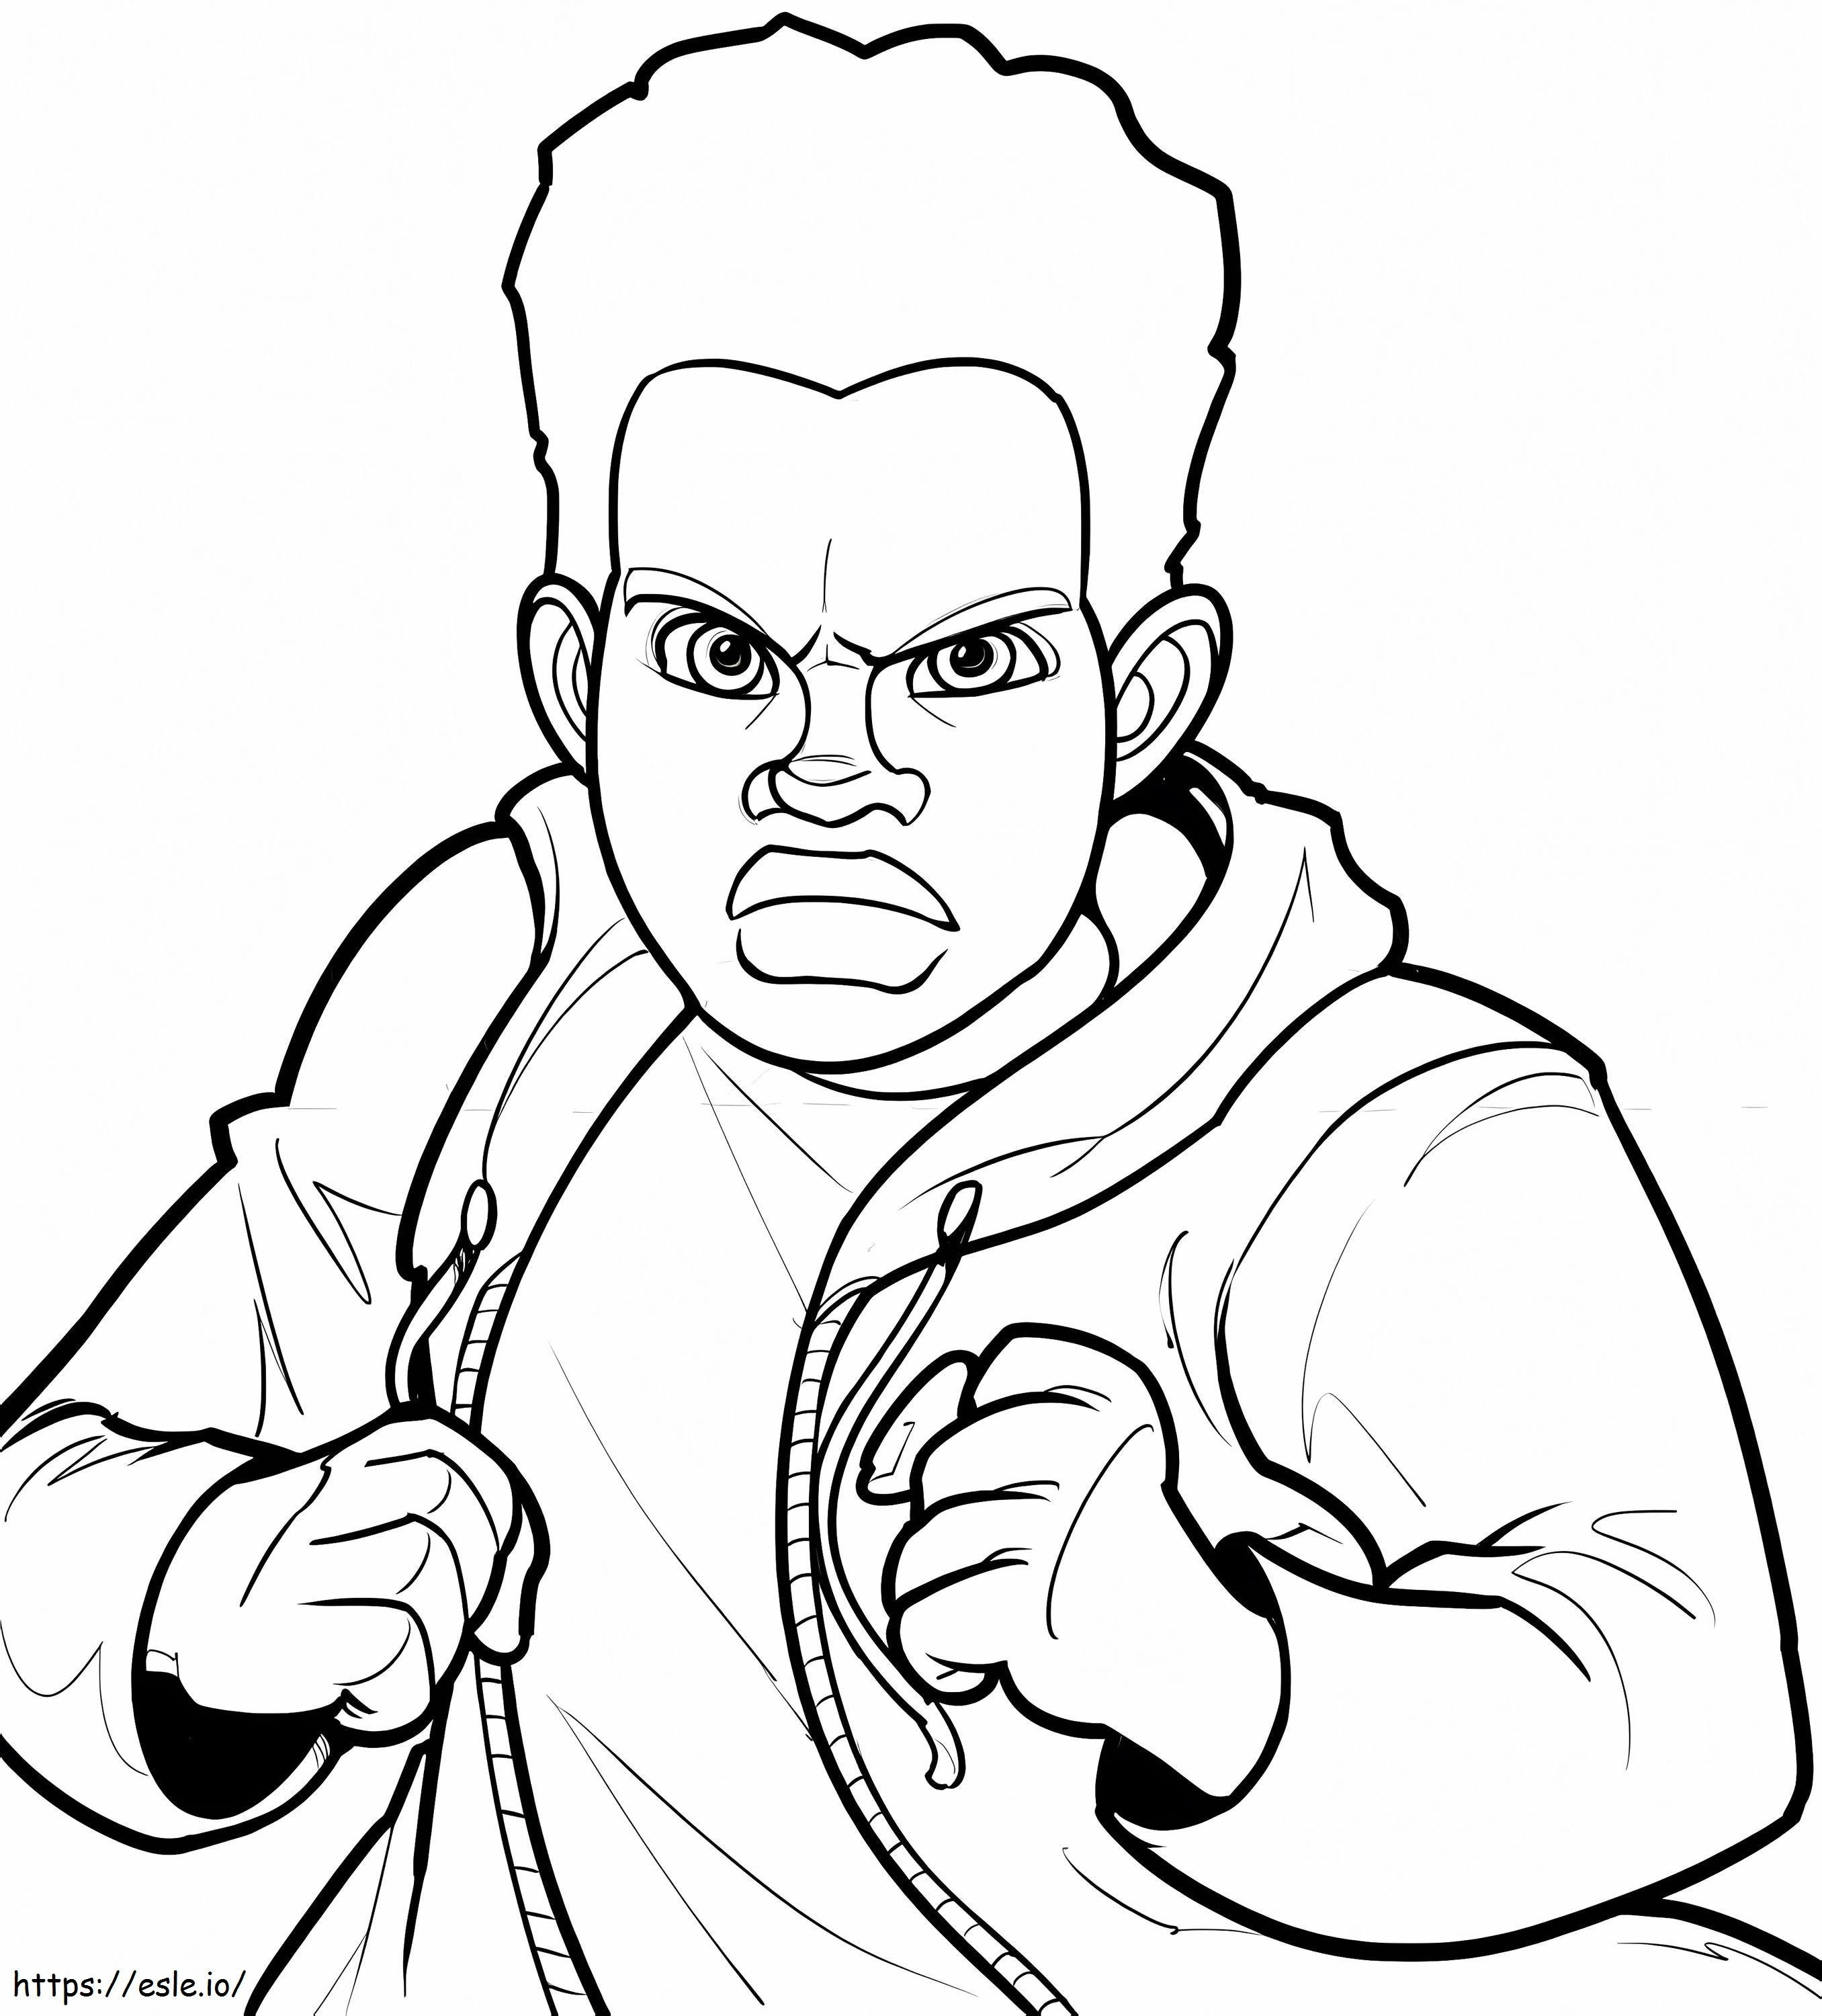 Angry Miles Morales coloring page